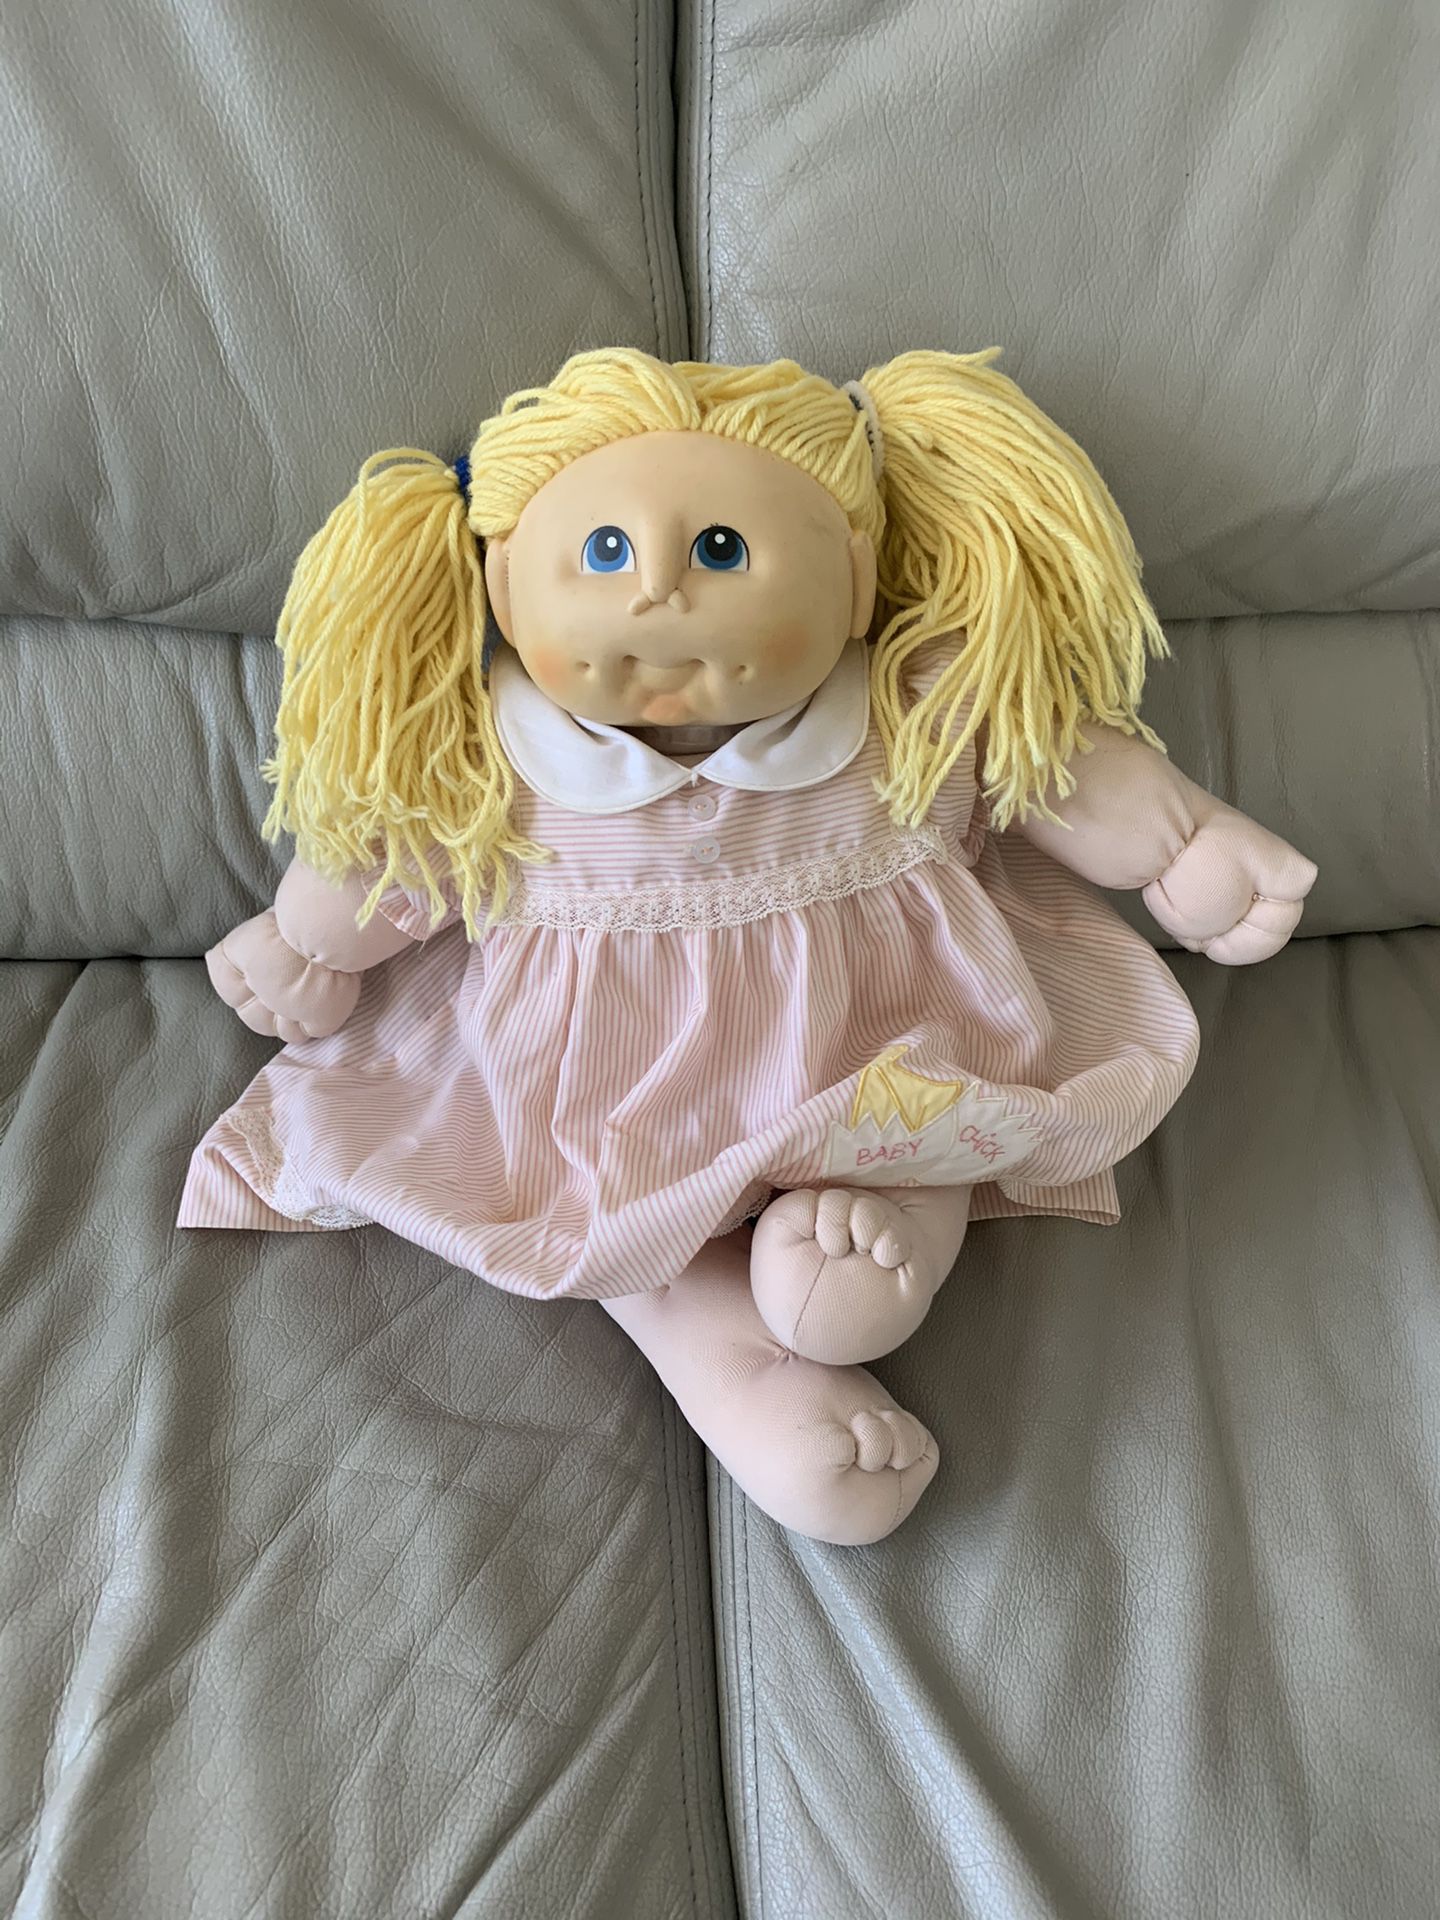 The original Doll Baby 1984 Fibre-Craft M.N. Thomas Soft doll toy 18”, clean excellent condition COLLECTABLE